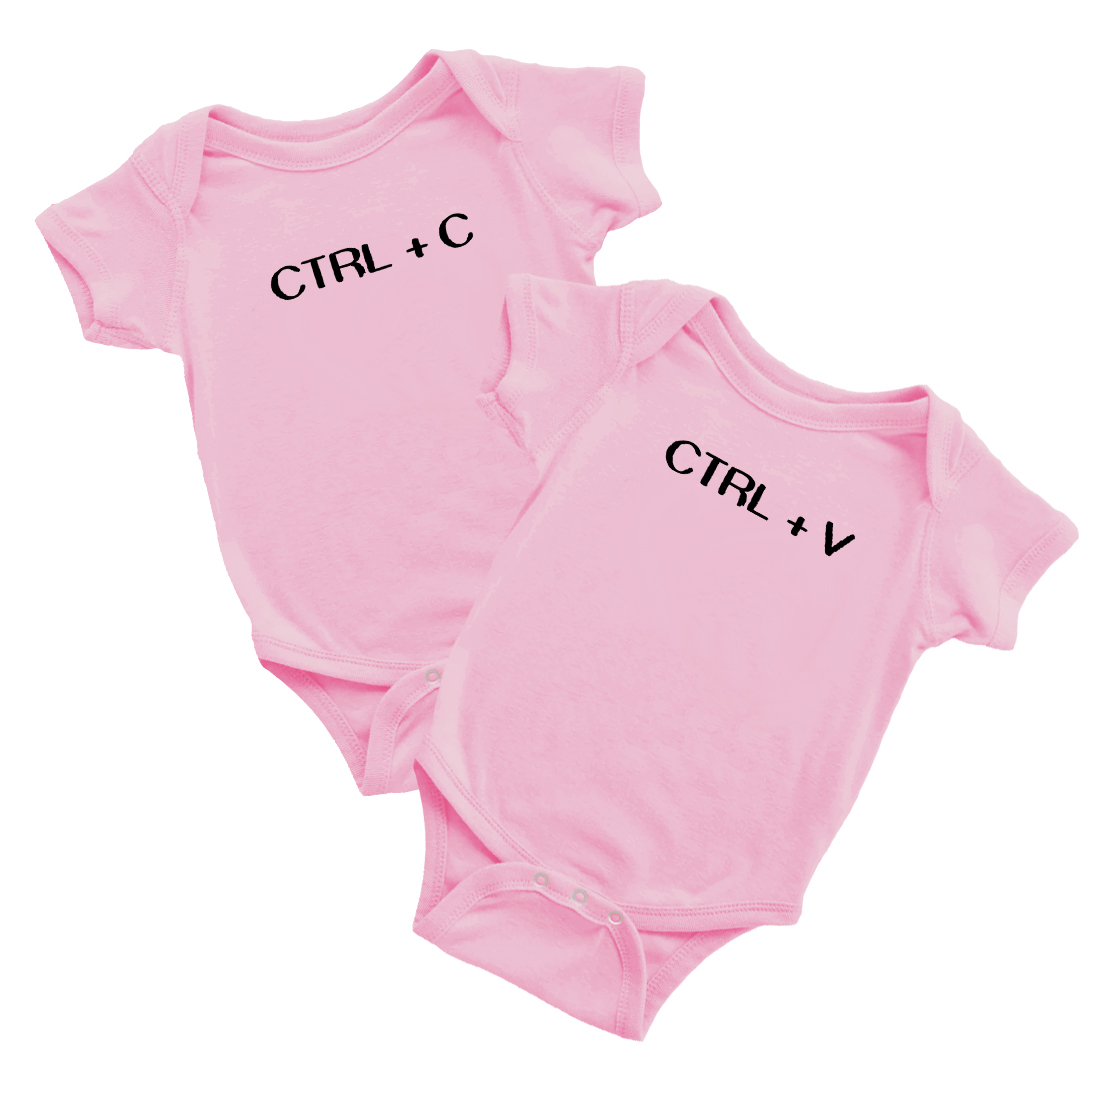 Twin Babys Funny Ctrl + C Ctrl + V Printed Infant Baby Cotton Bodysuits (Pink, 12-18M) - image 1 of 5